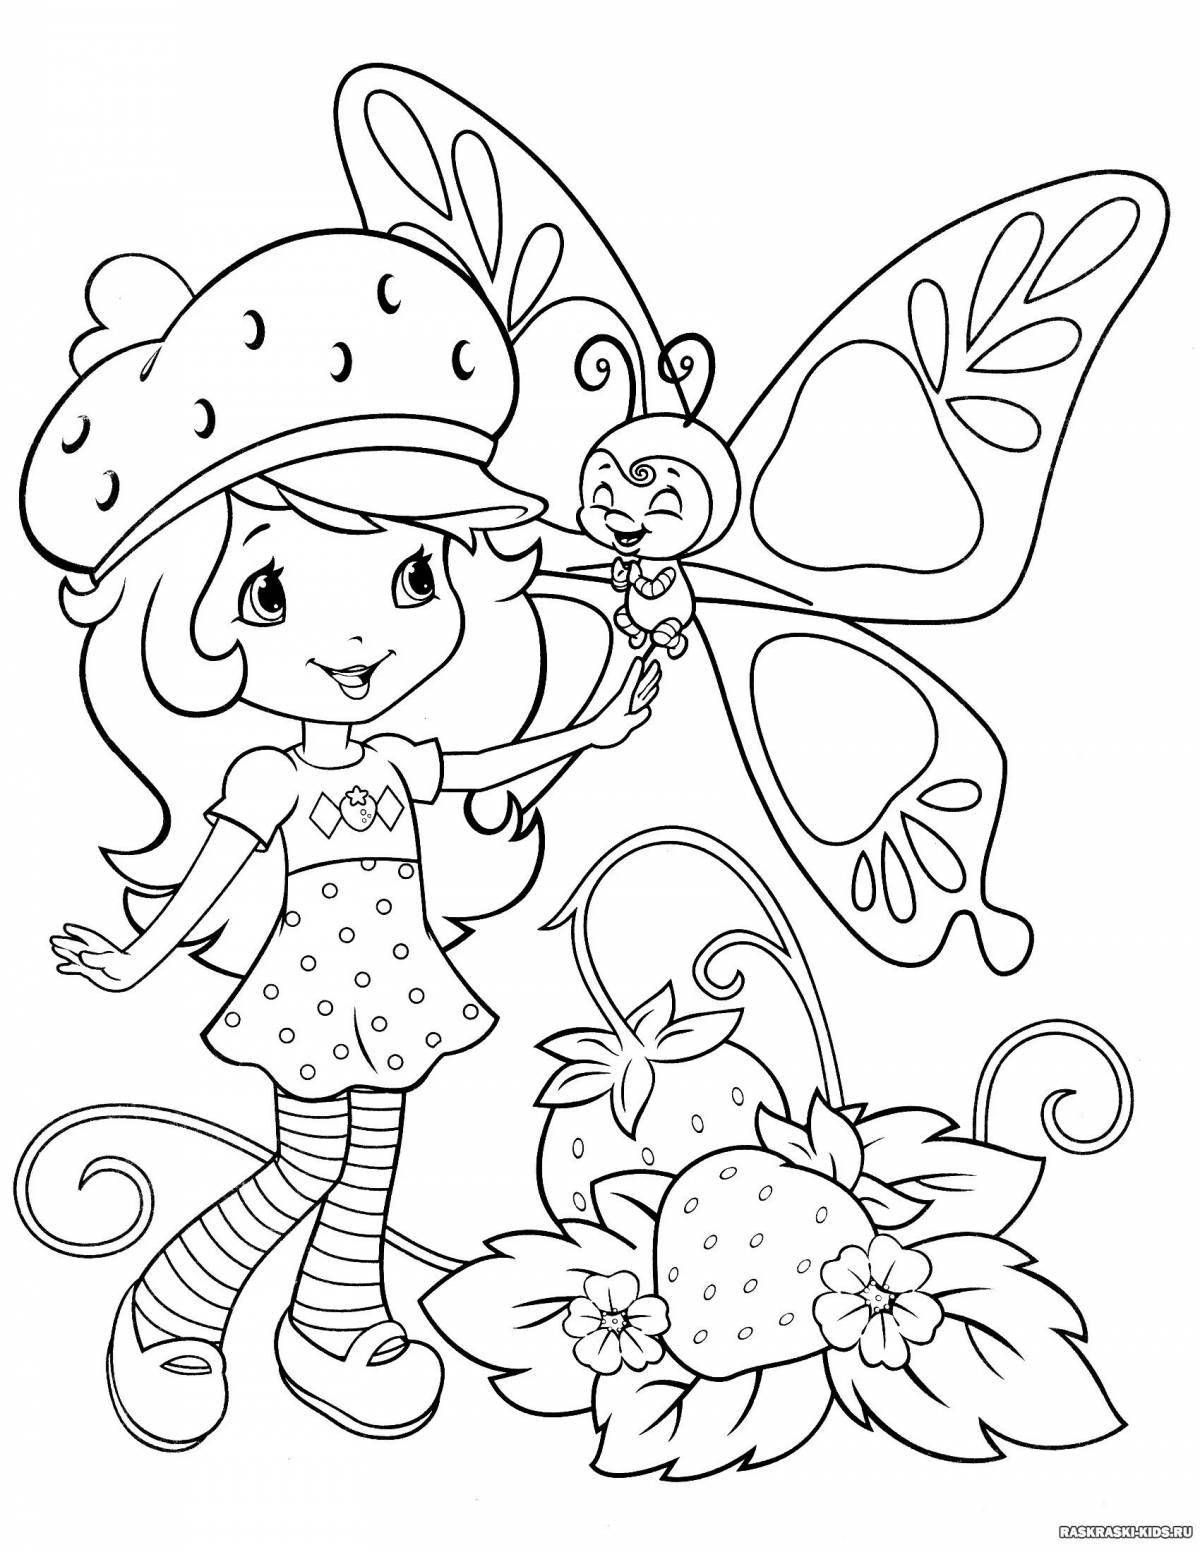 Cute coloring book for girls 5-6 years old